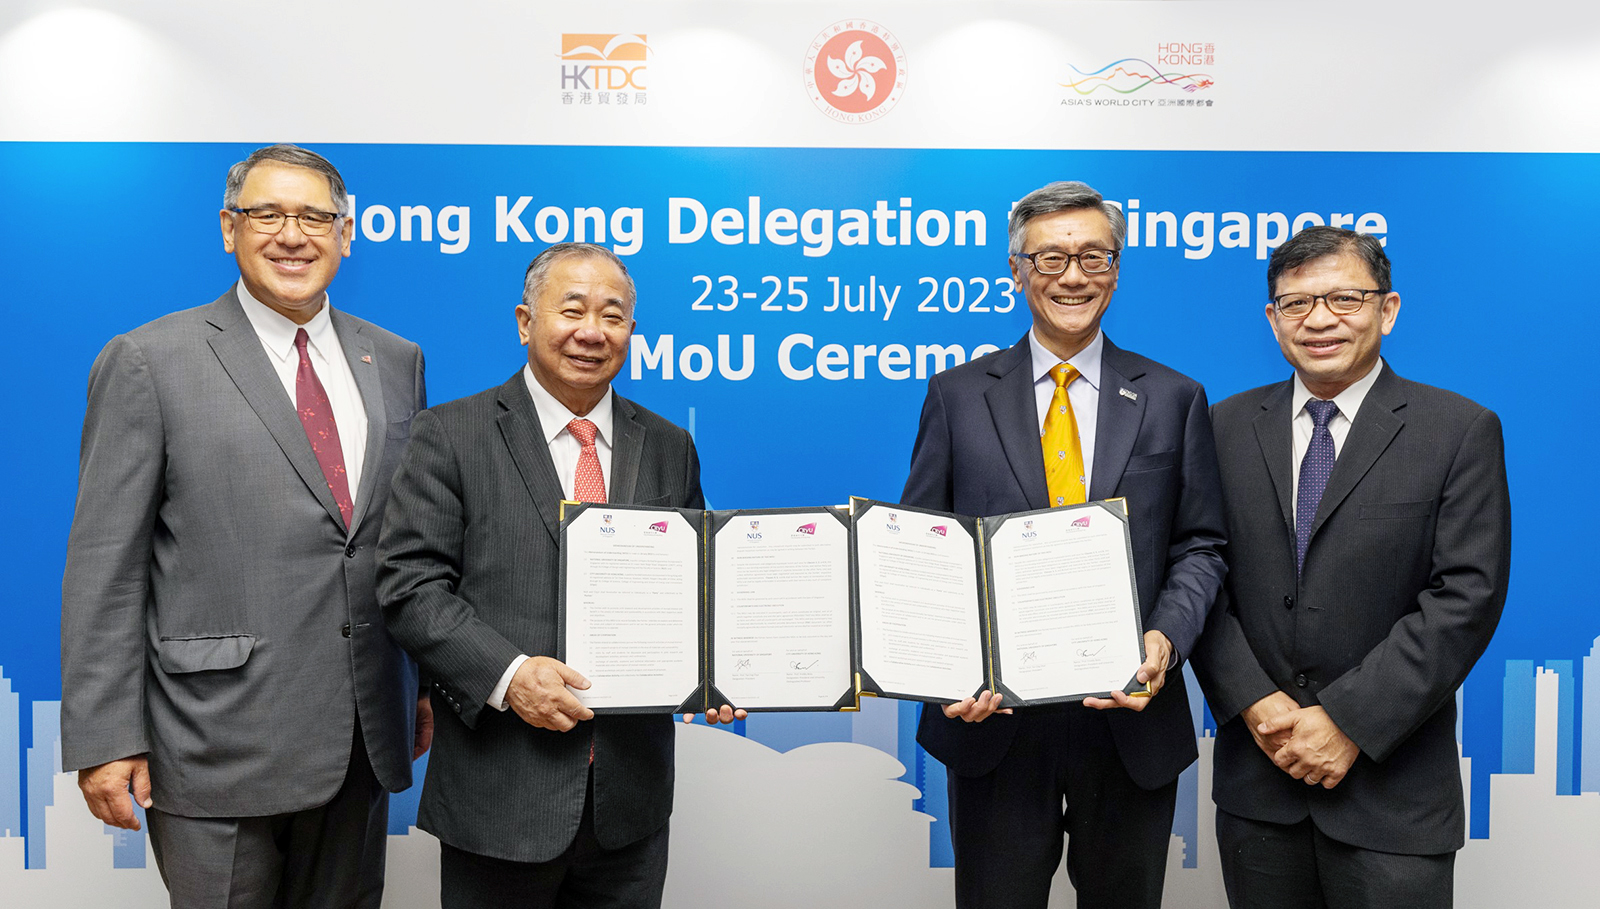 Professor Boey (second from left) and Professor Tan (second from right) exchanged the MoU, witnessed by Mr Huang (first from left) and Mr Loh (first from right). 